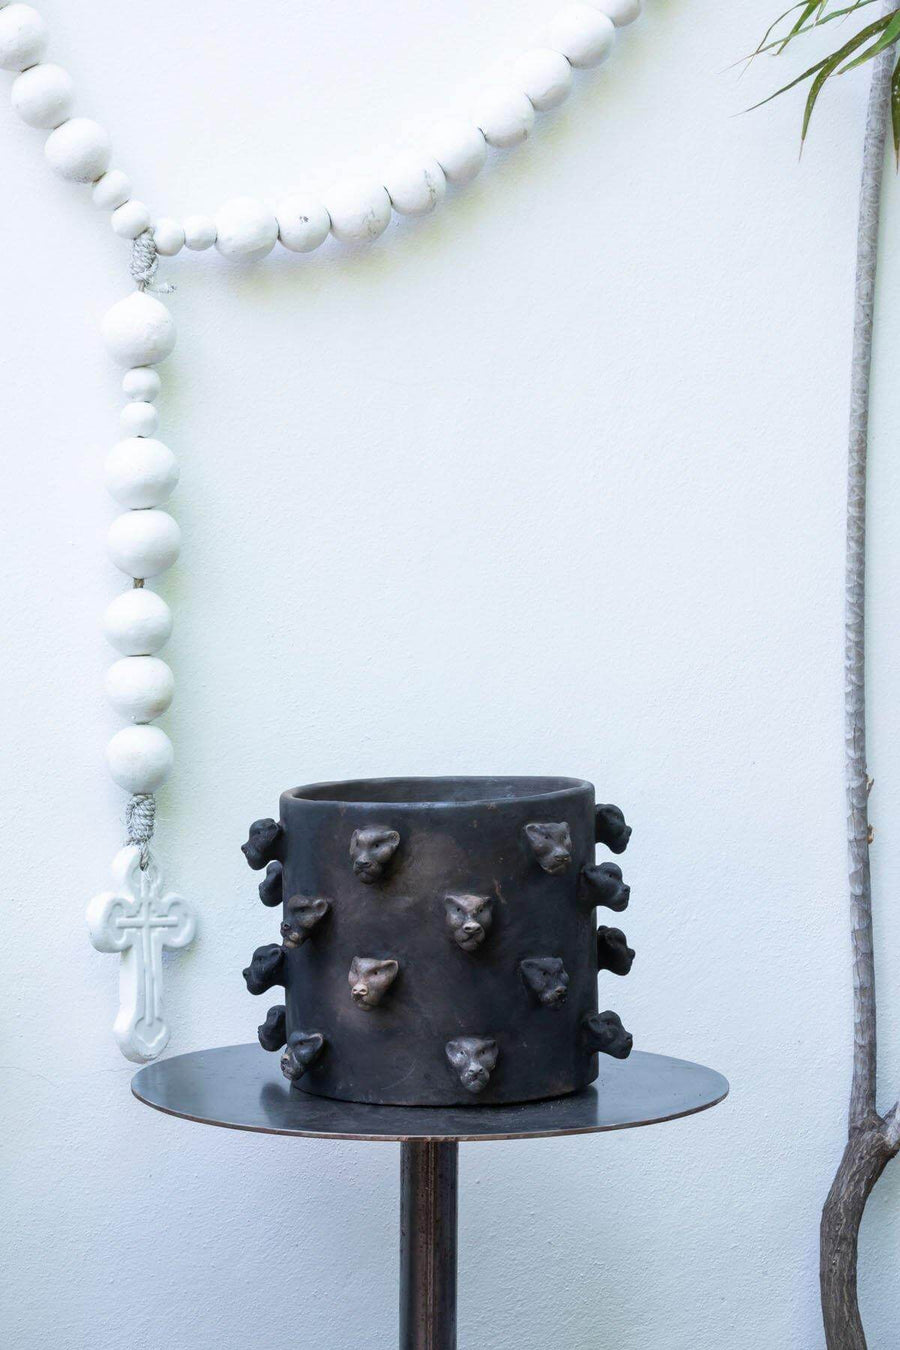 Elegant black ceramic planter, perfect for adding a modern touch to any space.